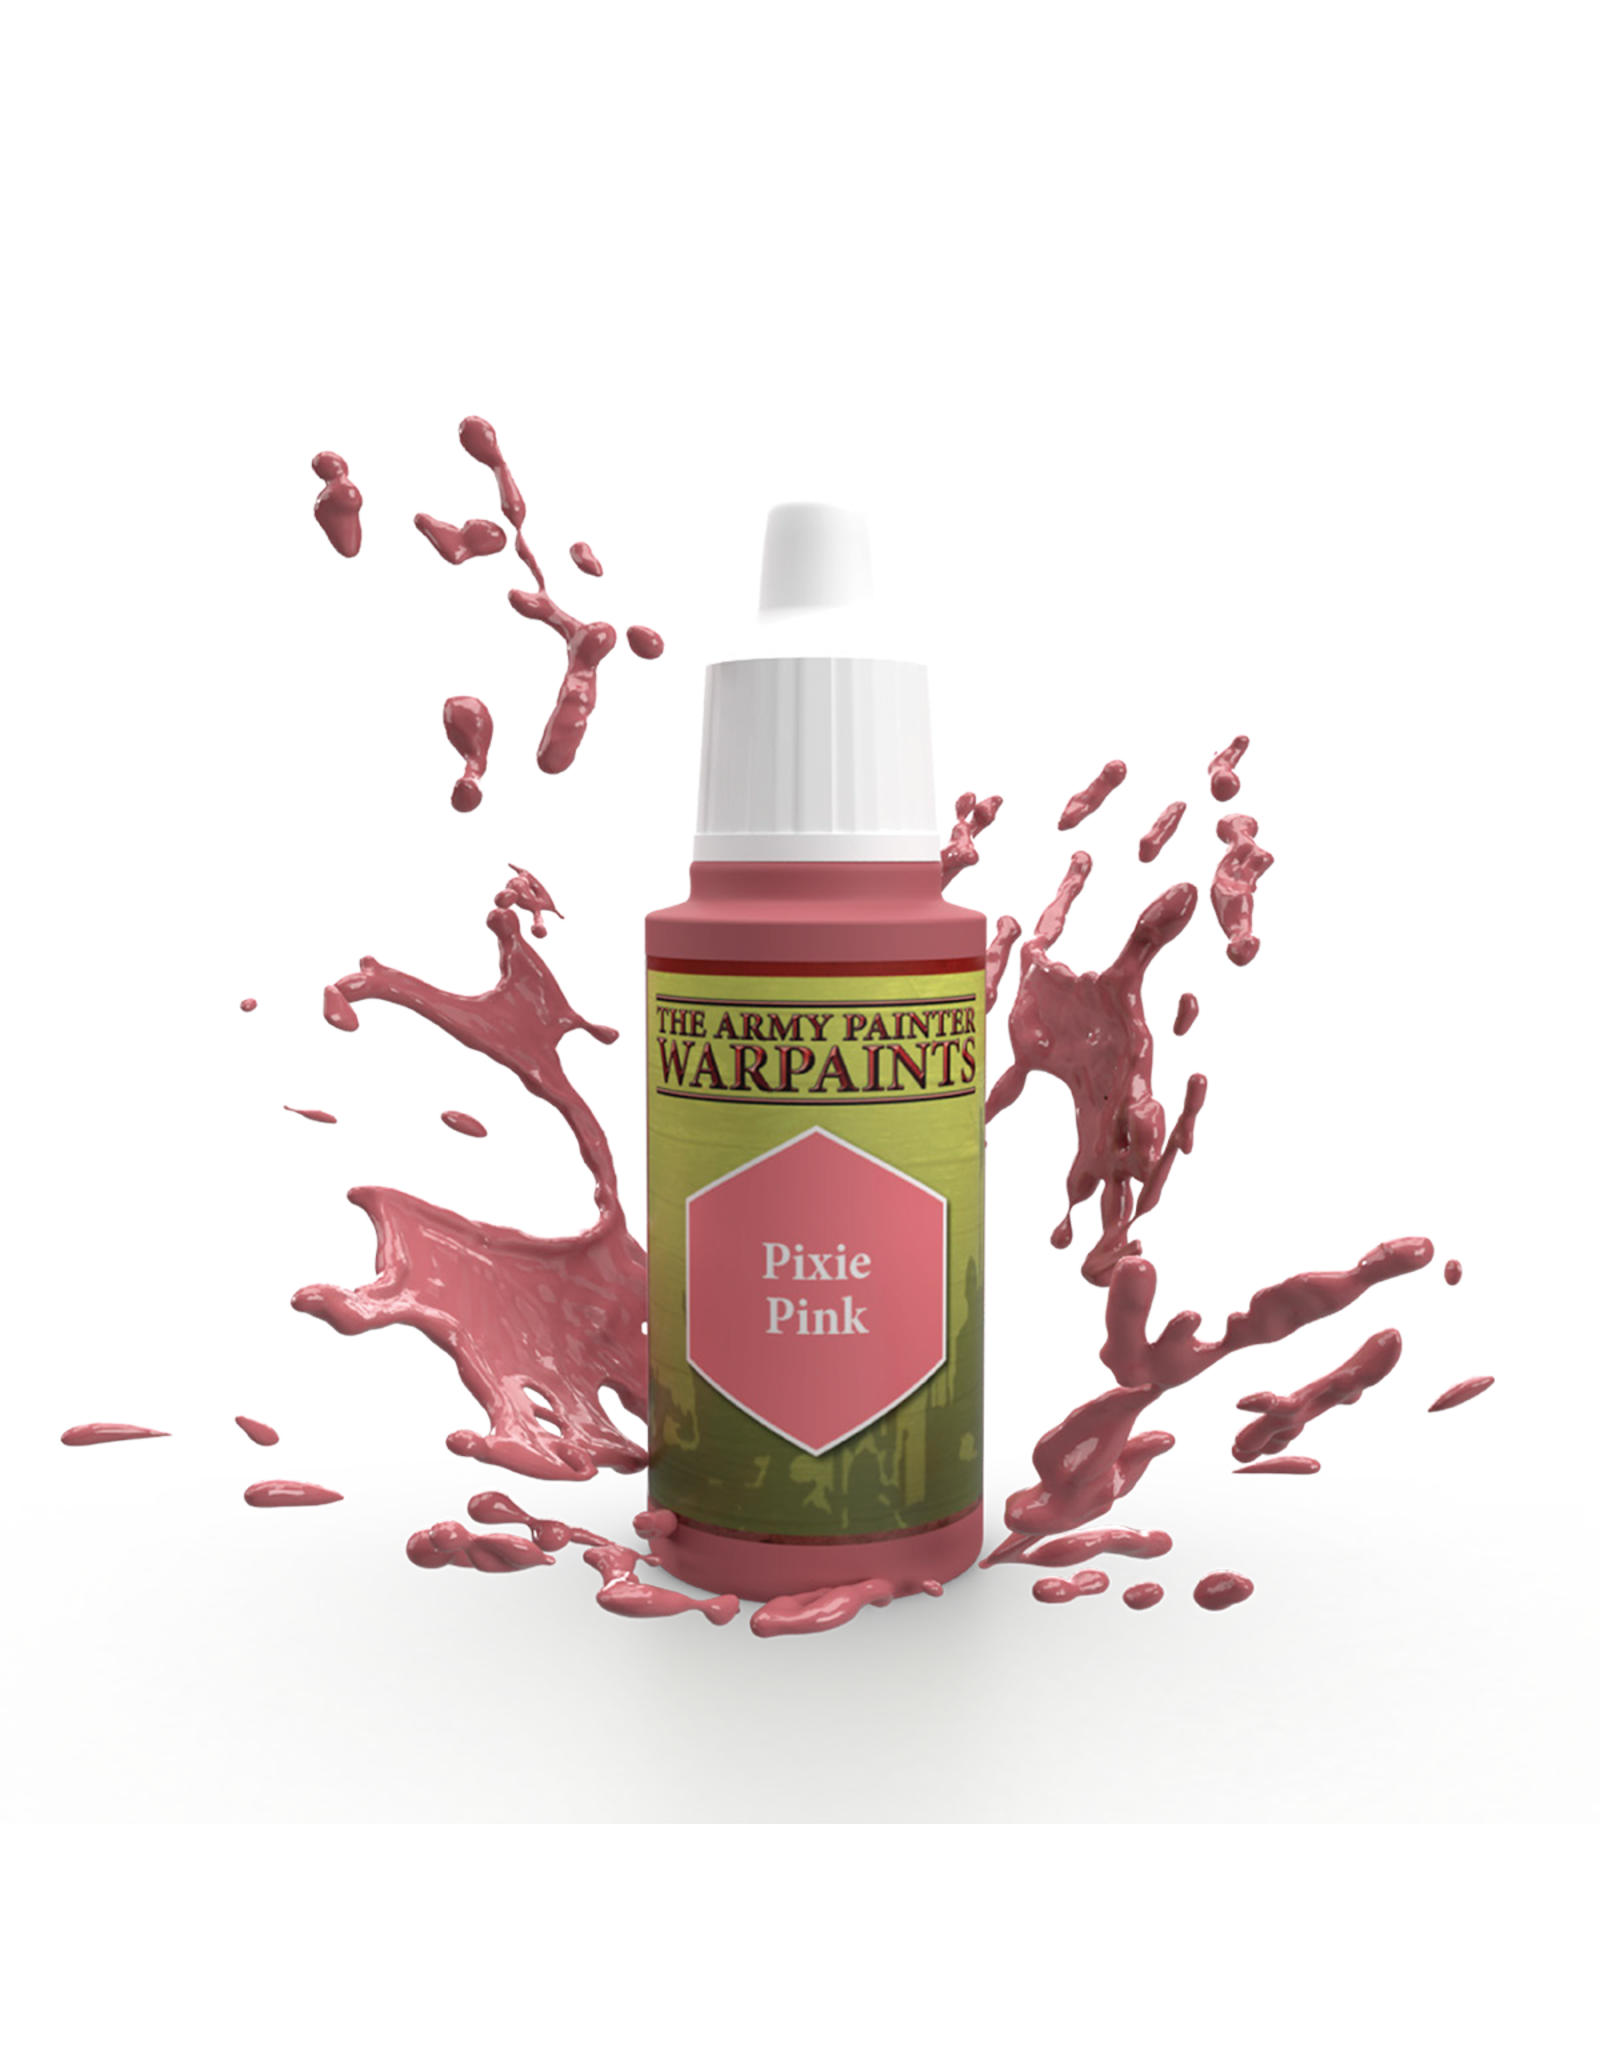 The Army Painter WP1447 Pixie Pink